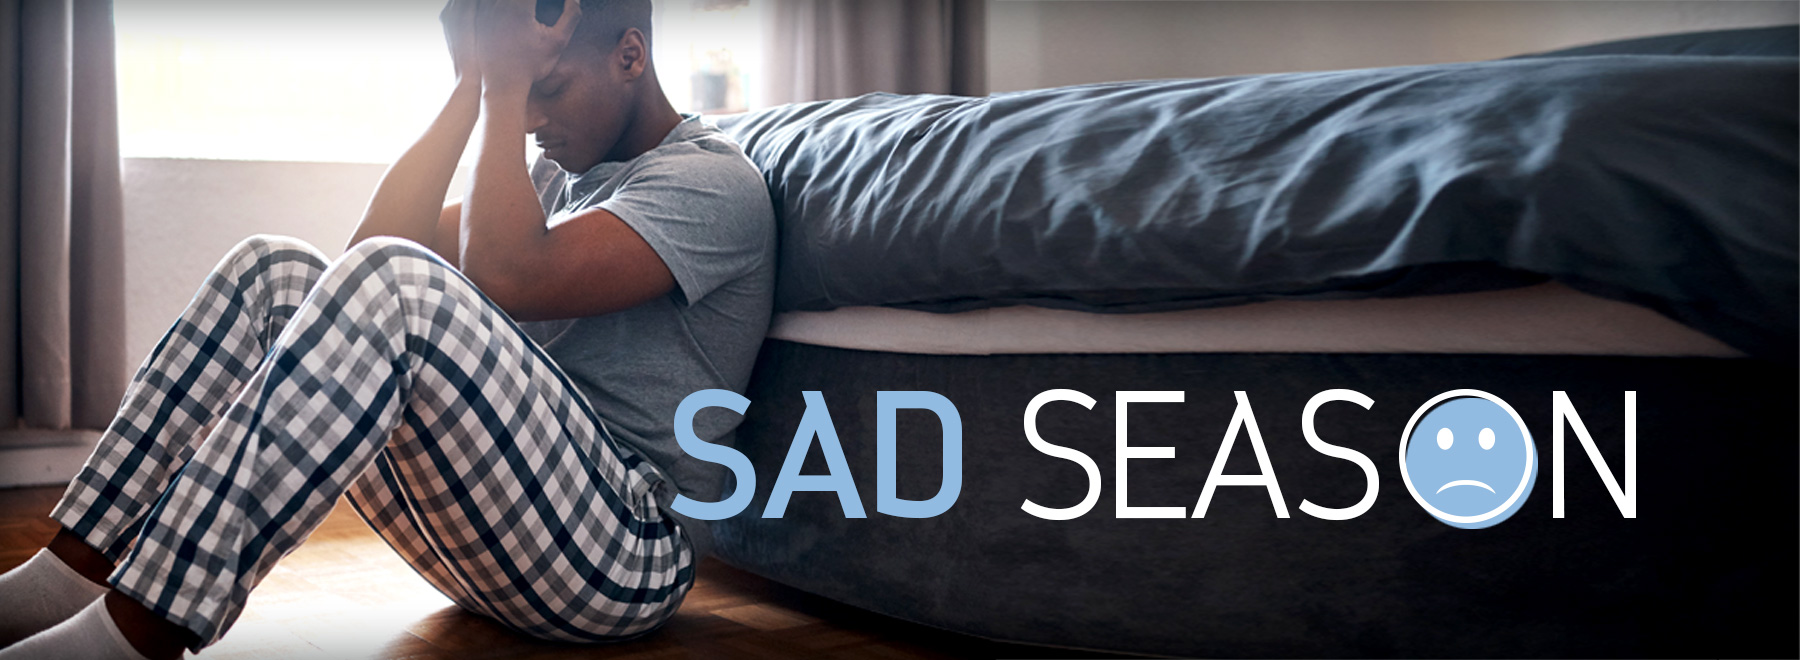 Man sitting by bed depressed with title Sad Season